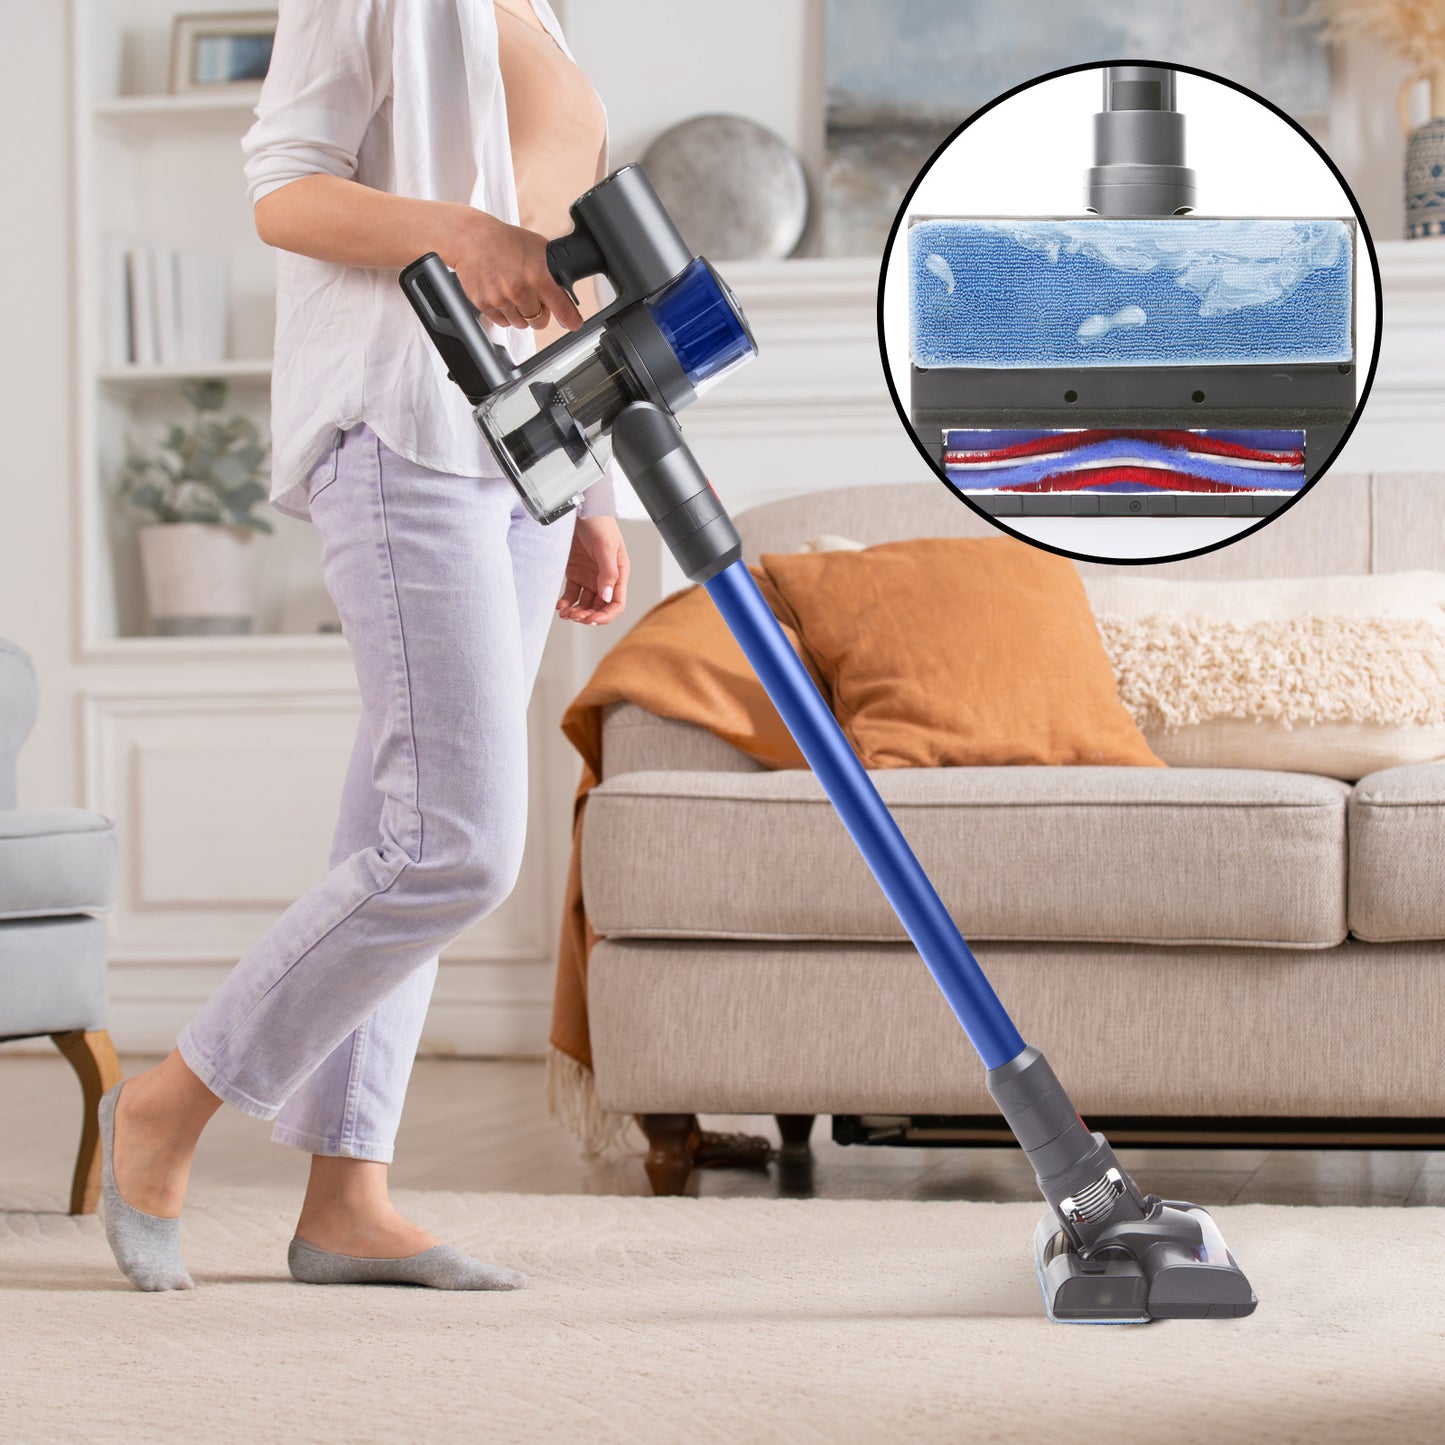 MyGenie H20 PRO Wet Mop 2-IN-1 Cordless Stick Vacuum Cleaner Handheld Recharge - Blue